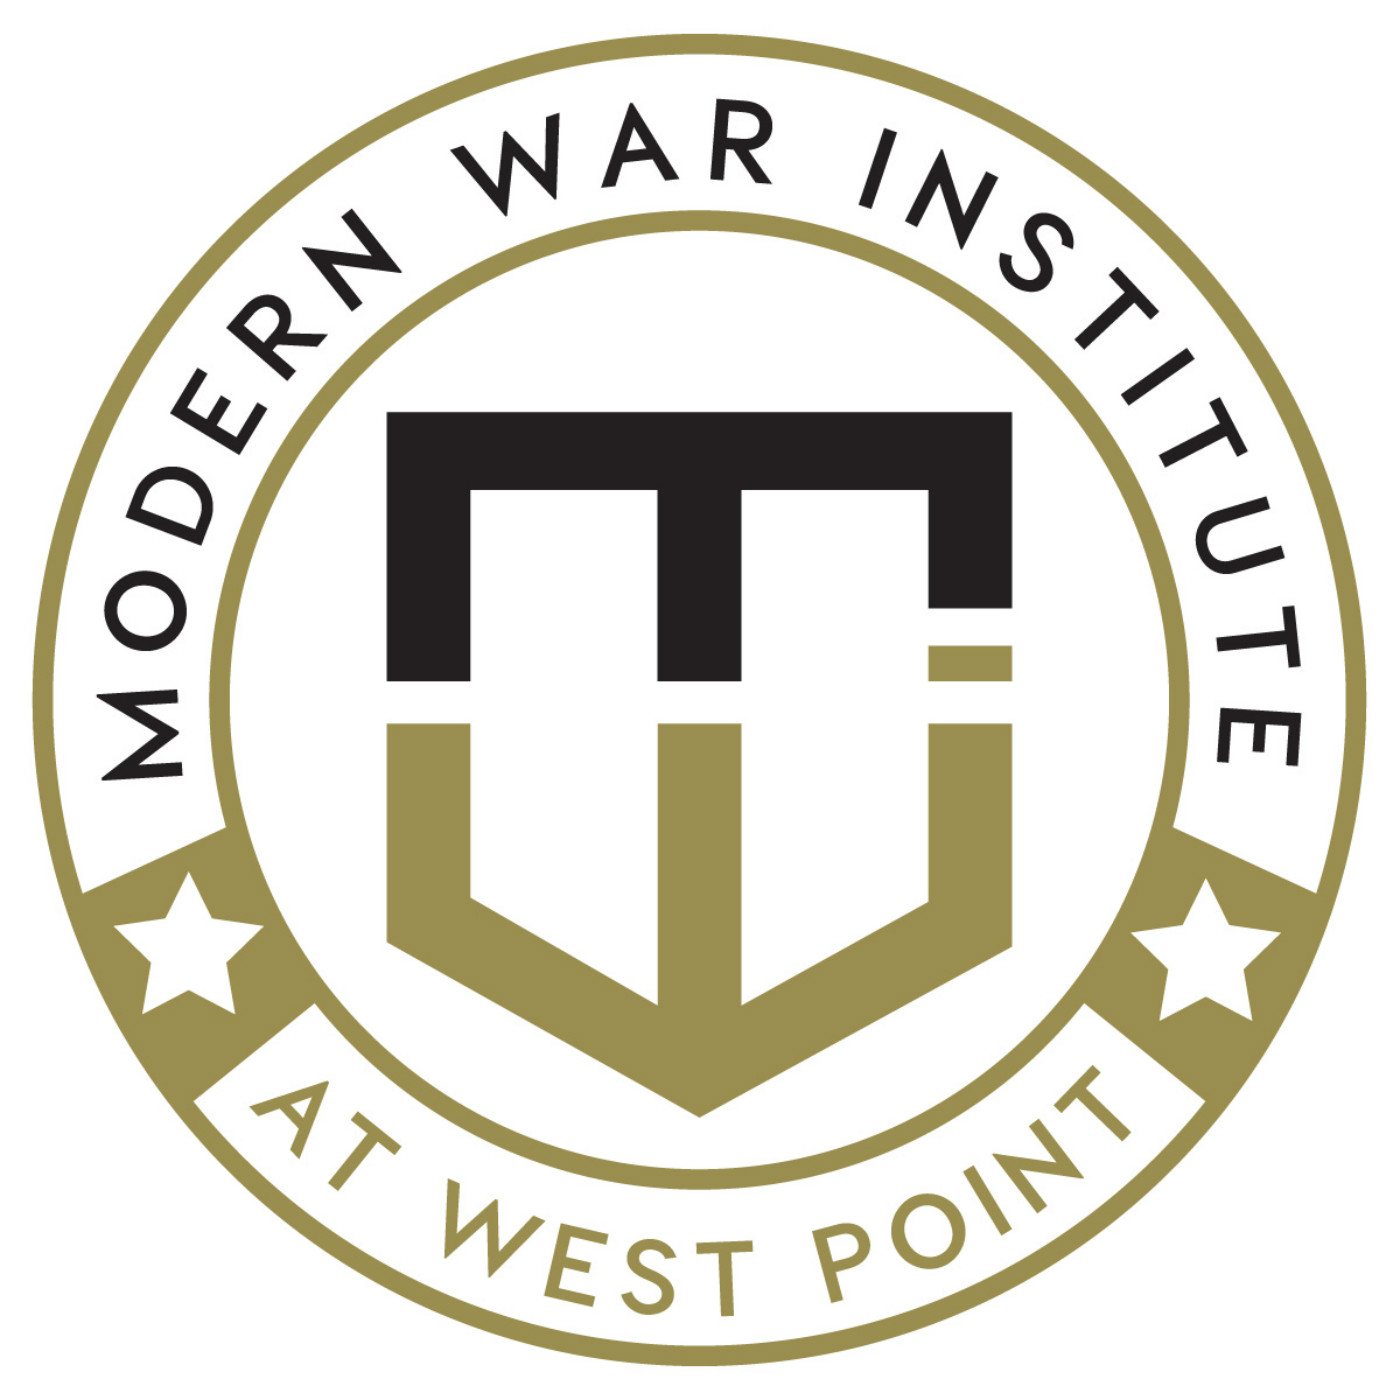 Ep. 8 - "War in the Greater Middle East" with Dr. Andrew Bacevich